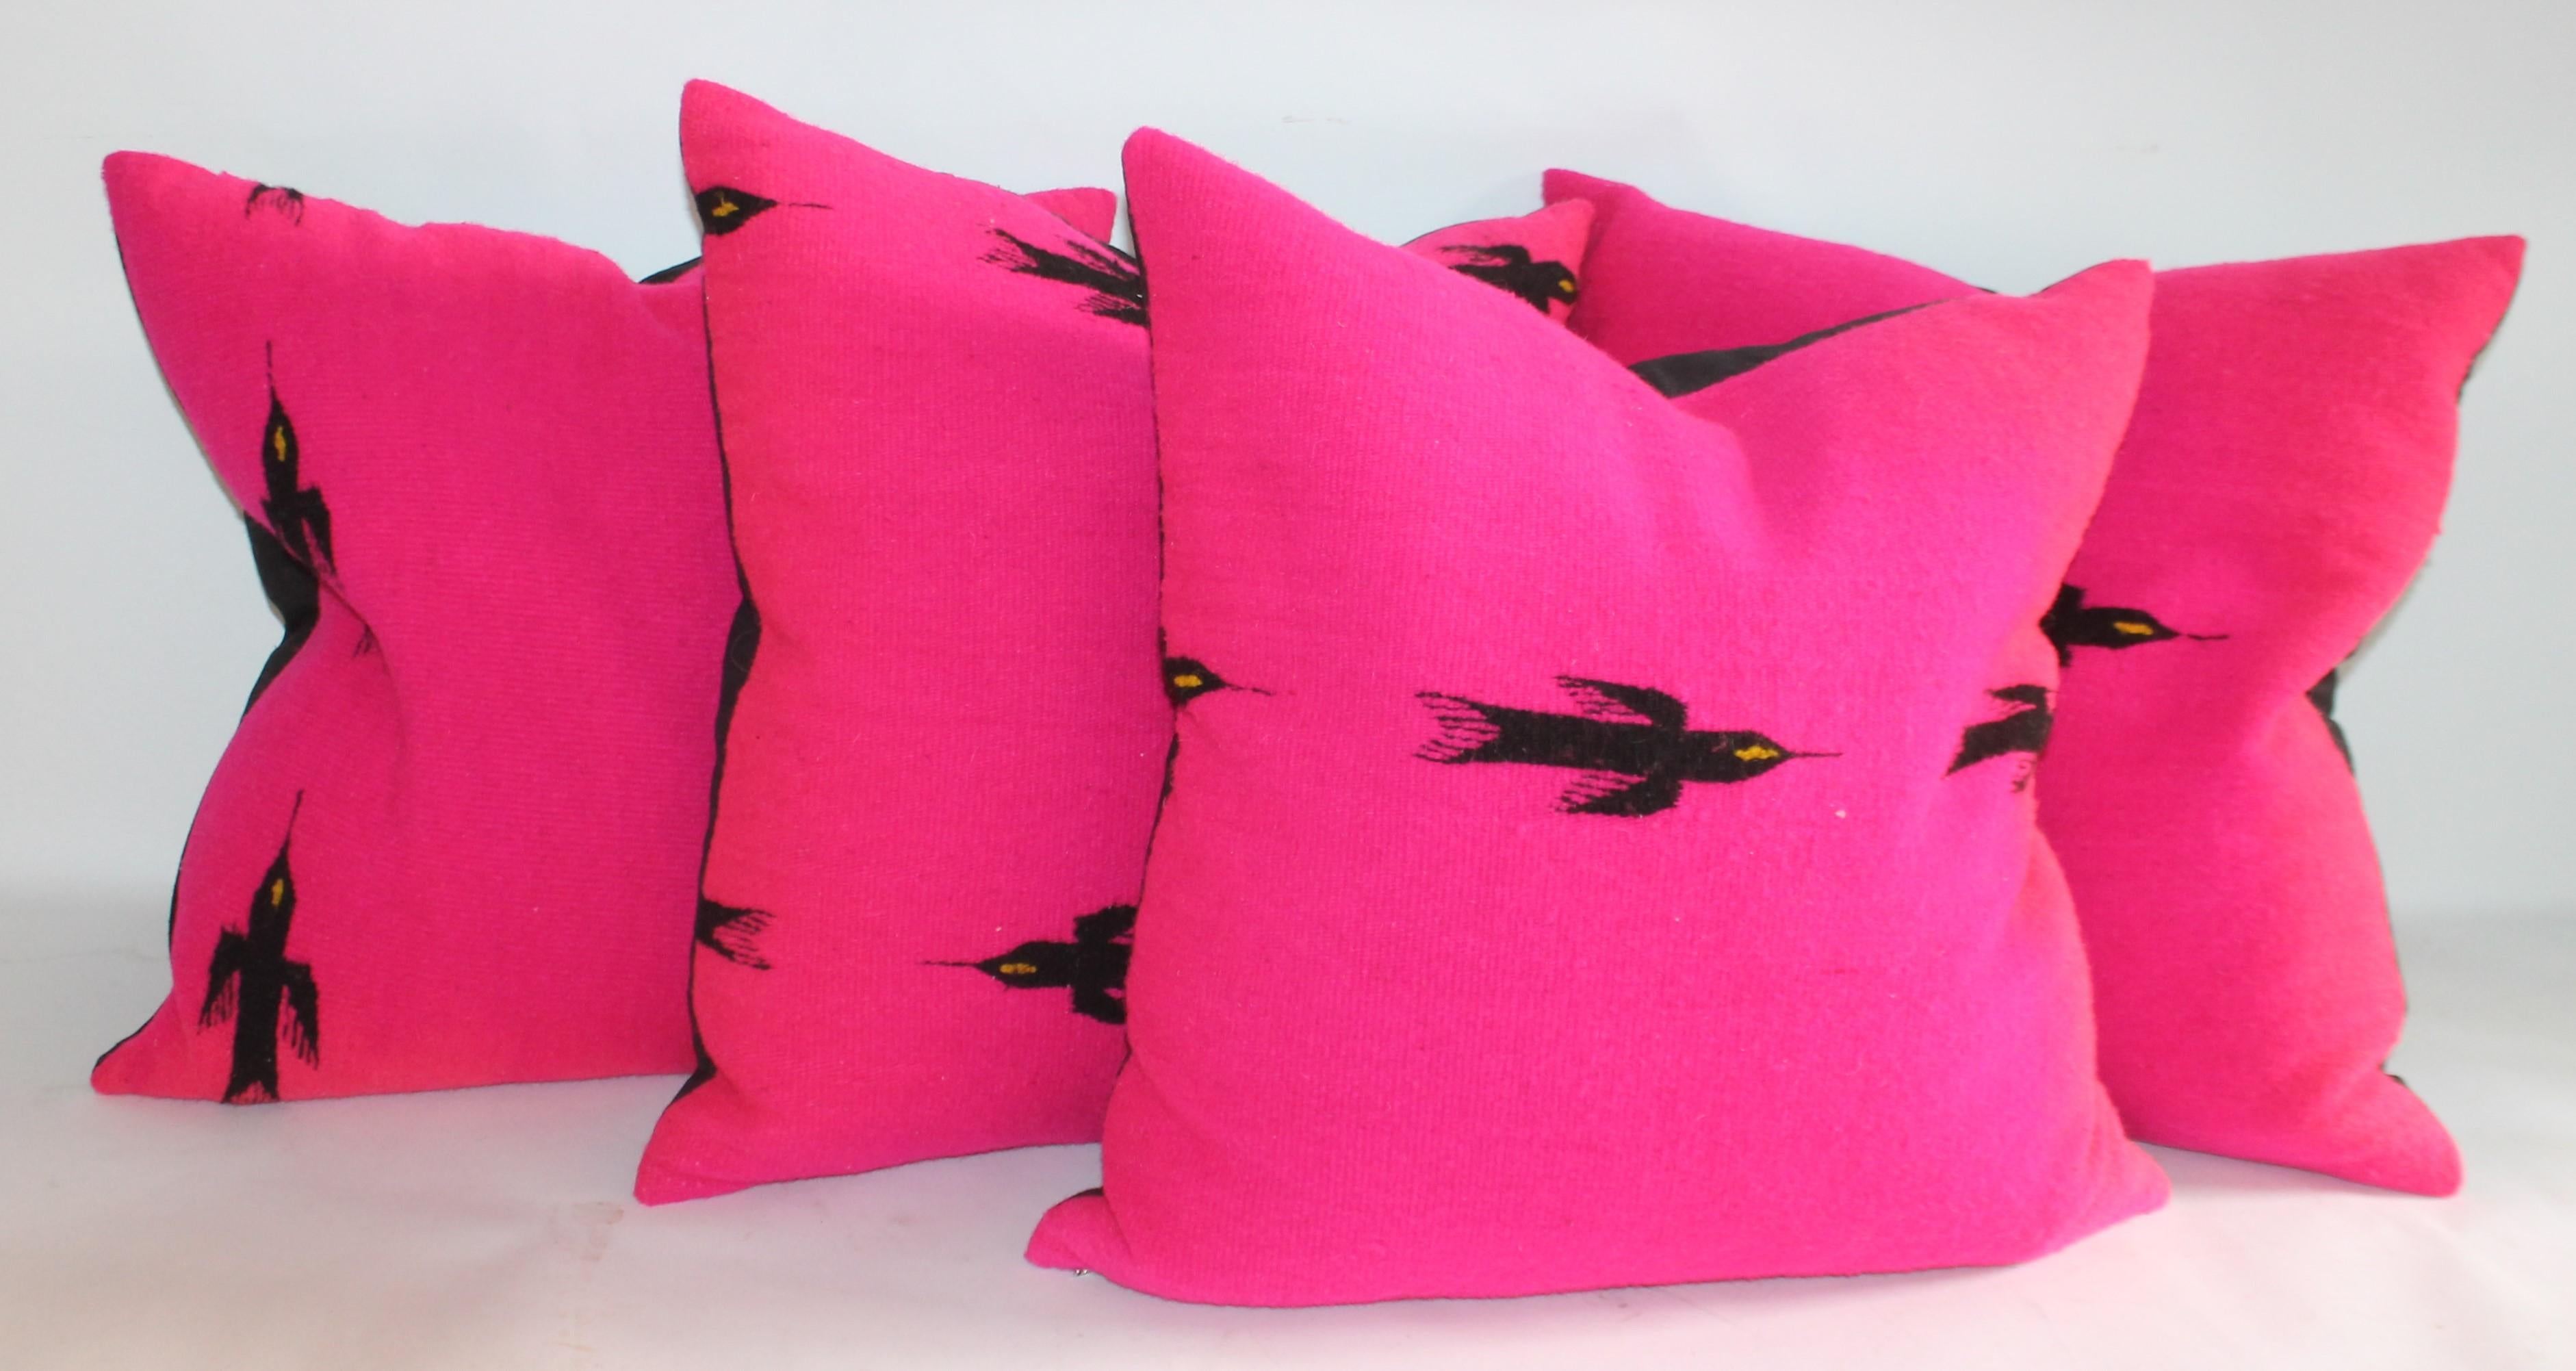 These fantastic Mexican Indian weaving pink with blackbirds in flight pillows. The backing is in black cotton linen. One pillow has slight fade or lightning of the fabric.